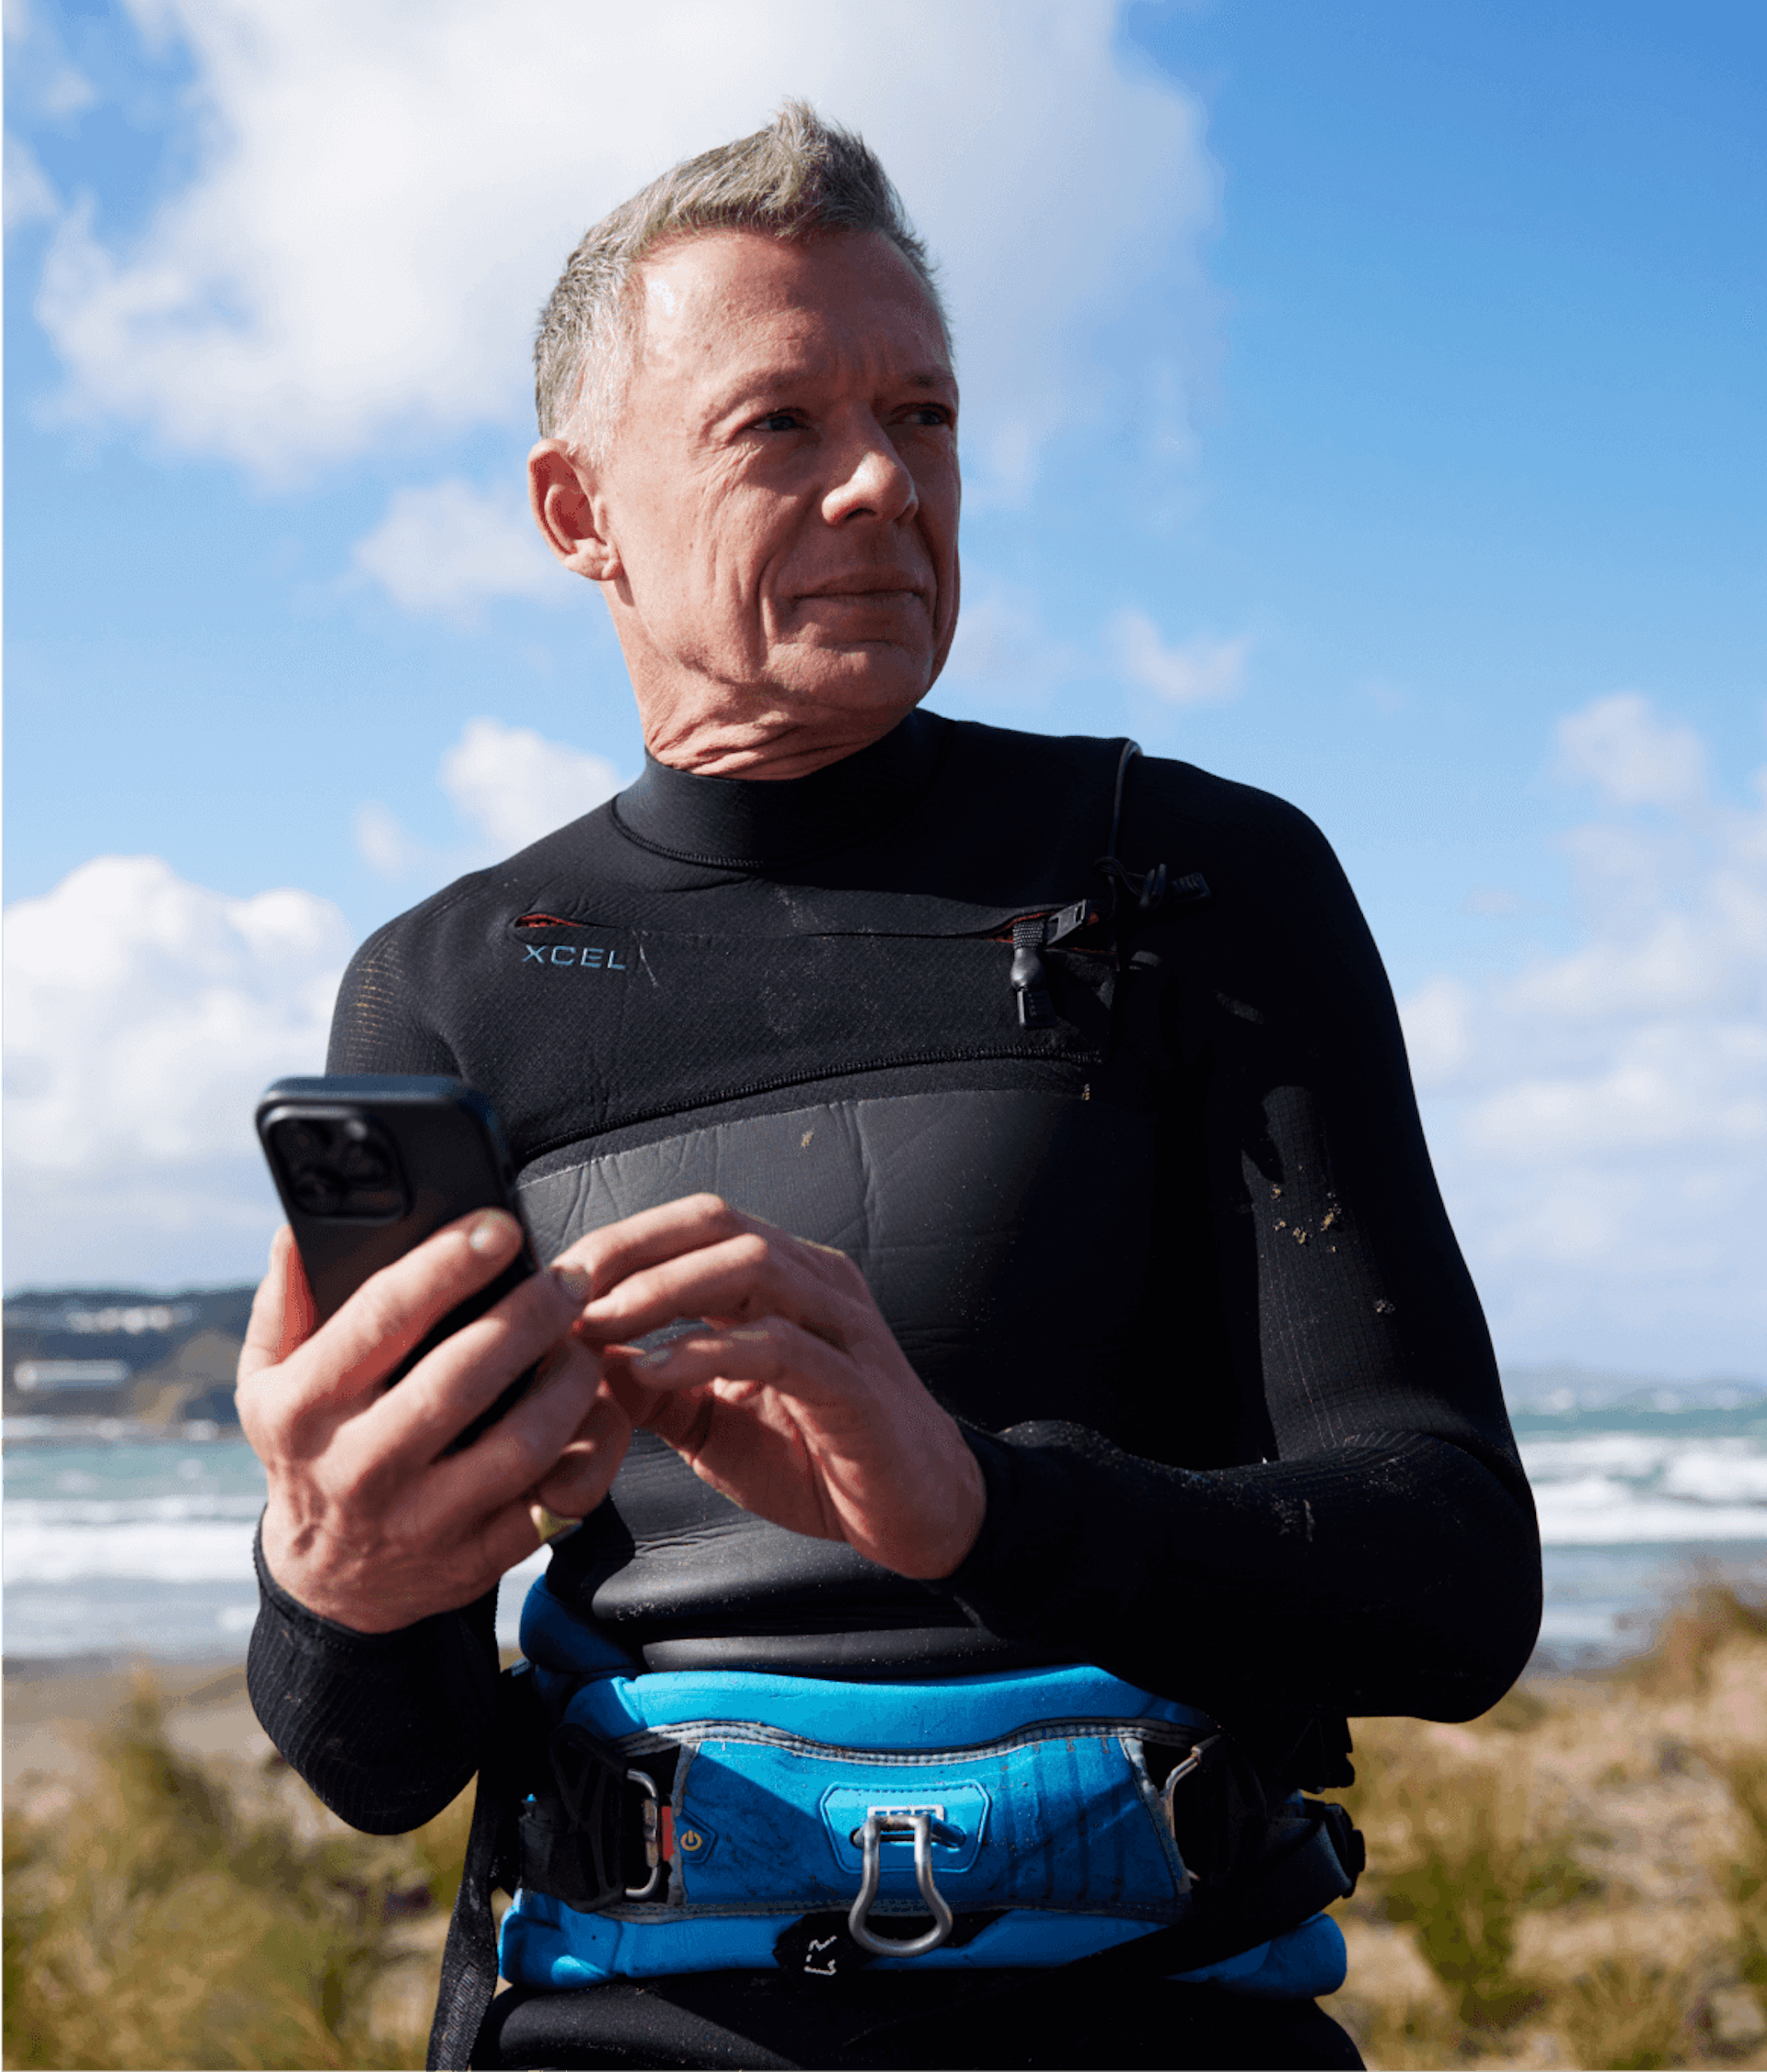 A middle-aged man in a wet suit holds a phone in his hand at the beach.